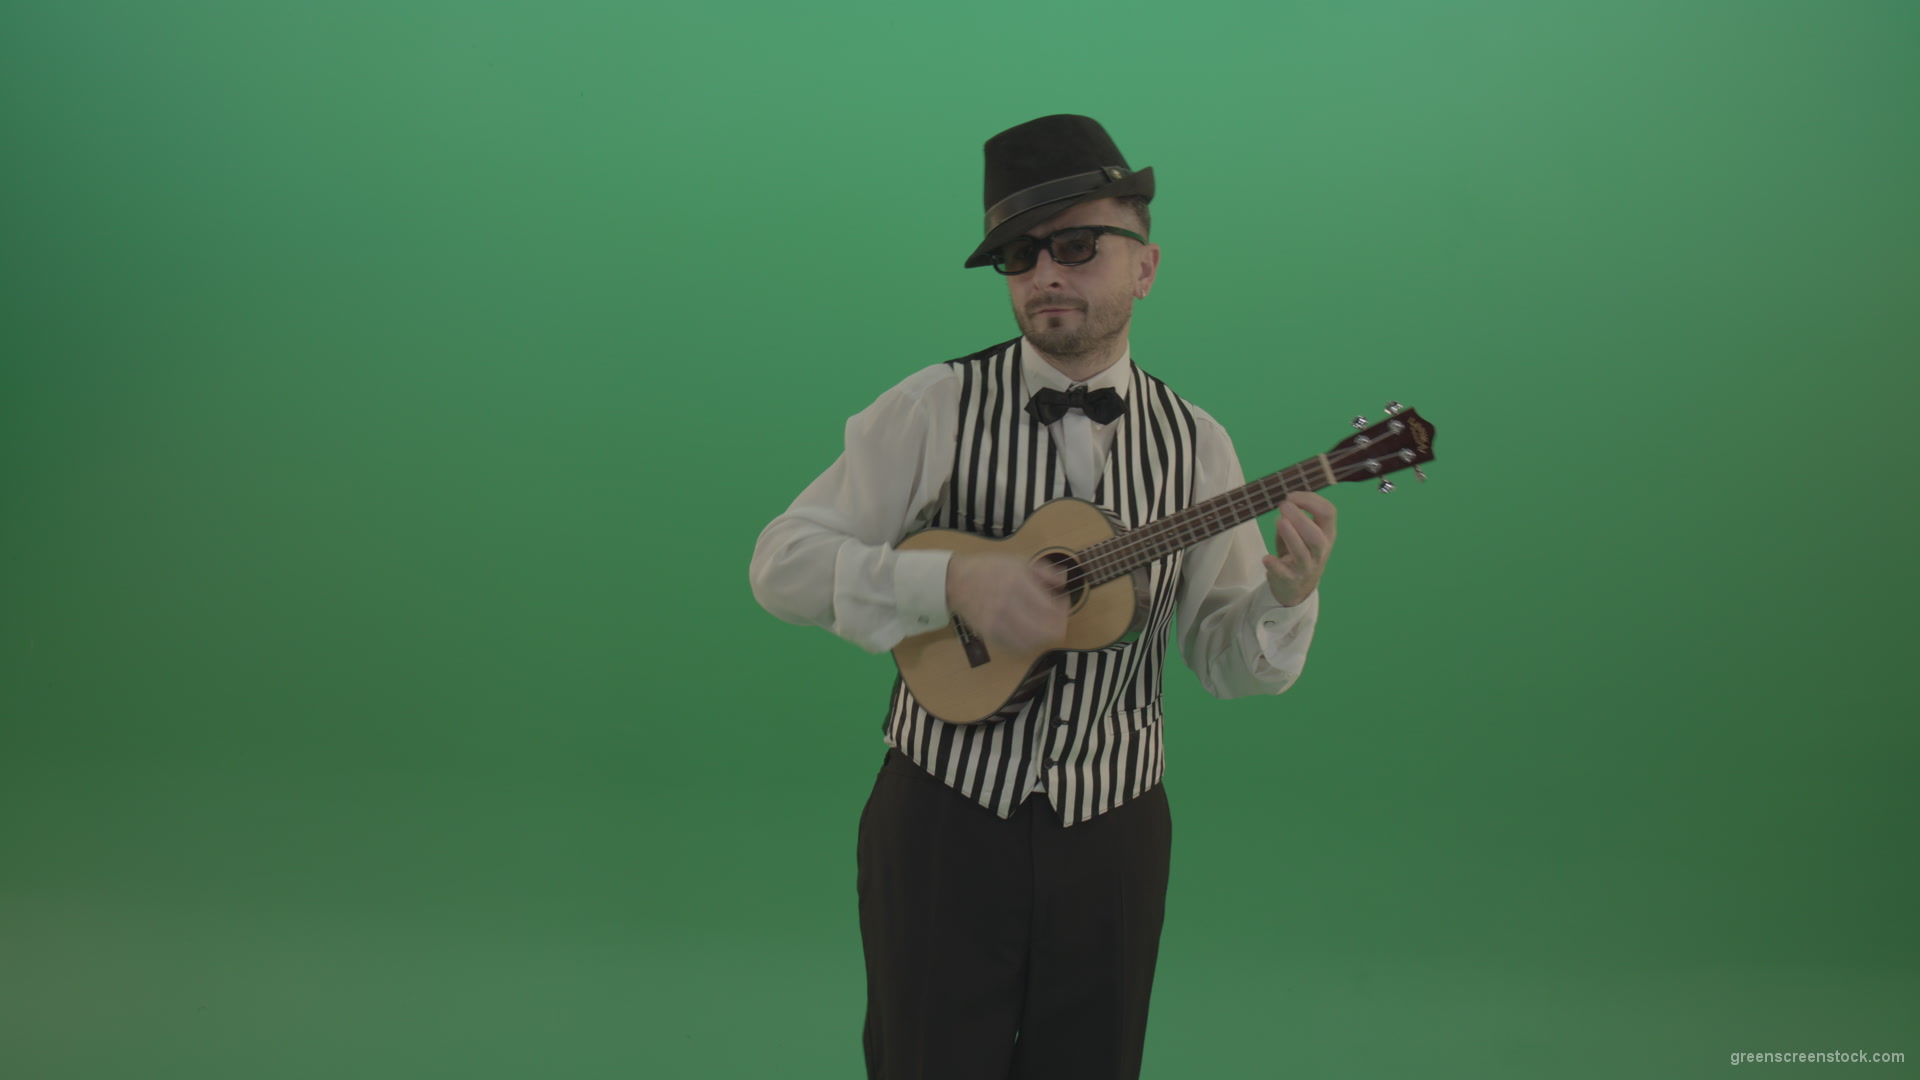 Funny-guitar-player-with-small-classic-guitar-on-chromakey-green-screen_007 Green Screen Stock